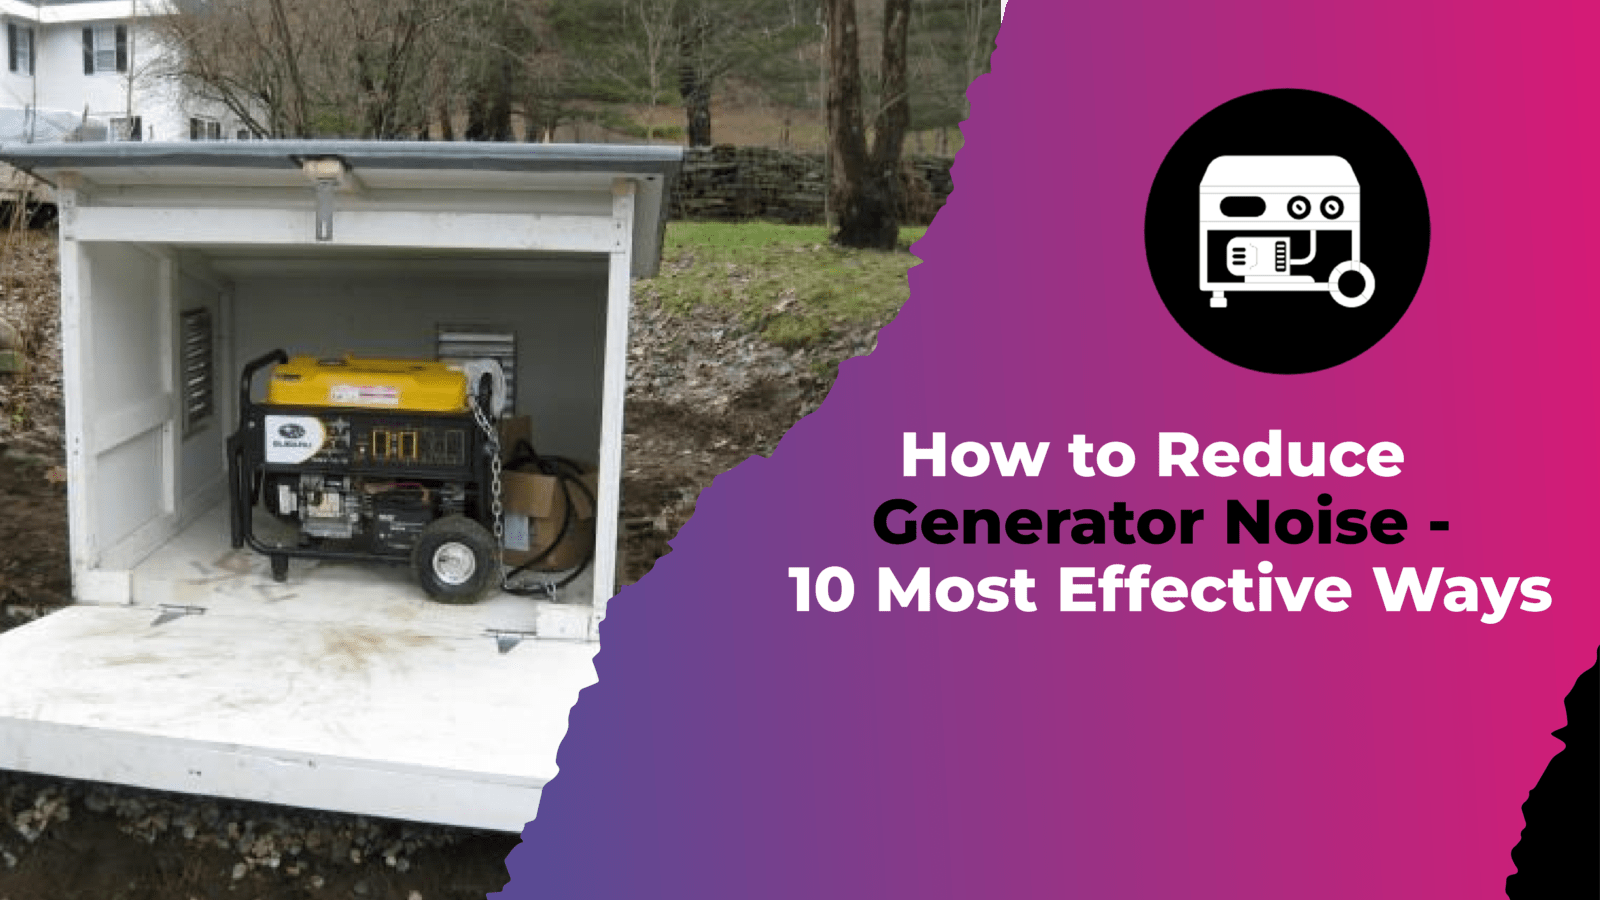 How to Reduce Generator Noise - 10 Most Effective Ways